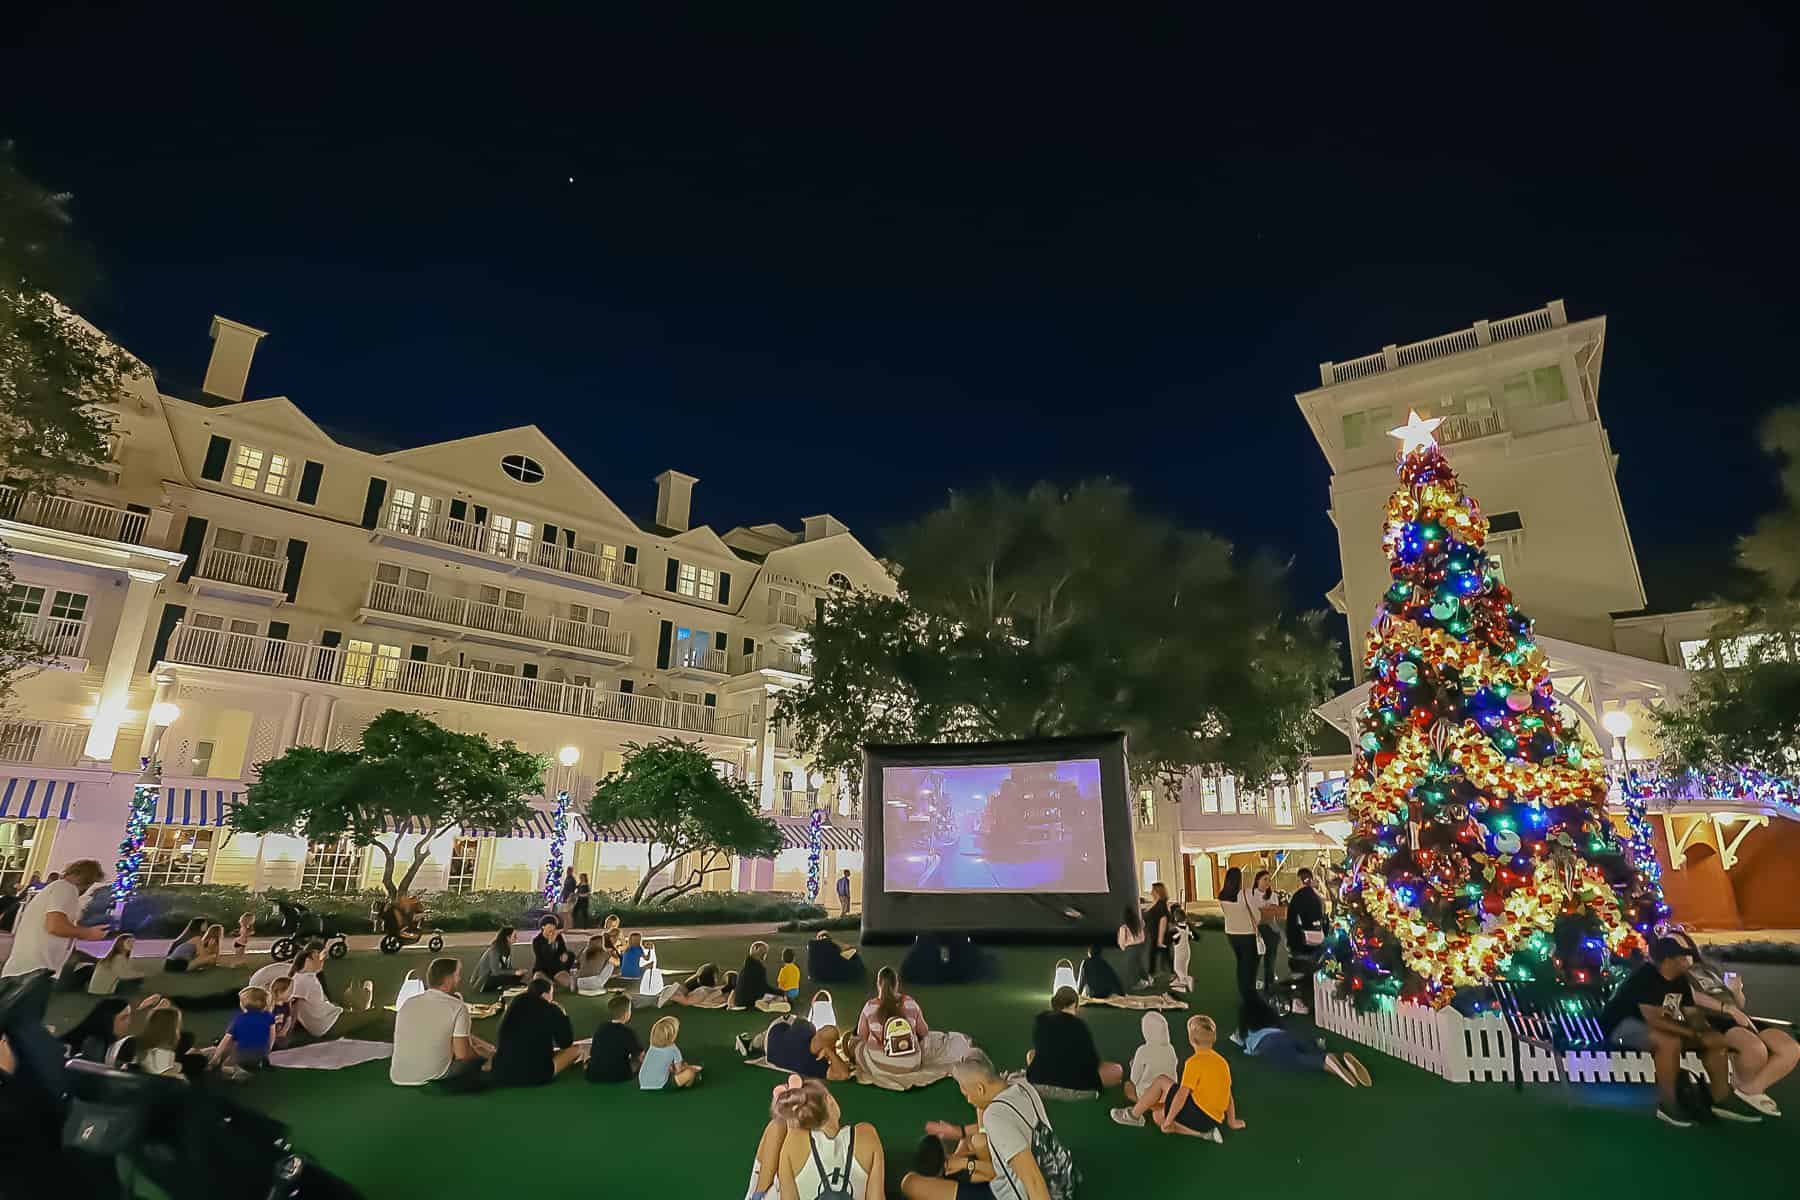 families enjoying a movie on the lawn next to the outdoor Christmas tree at Disney's Boardwalk